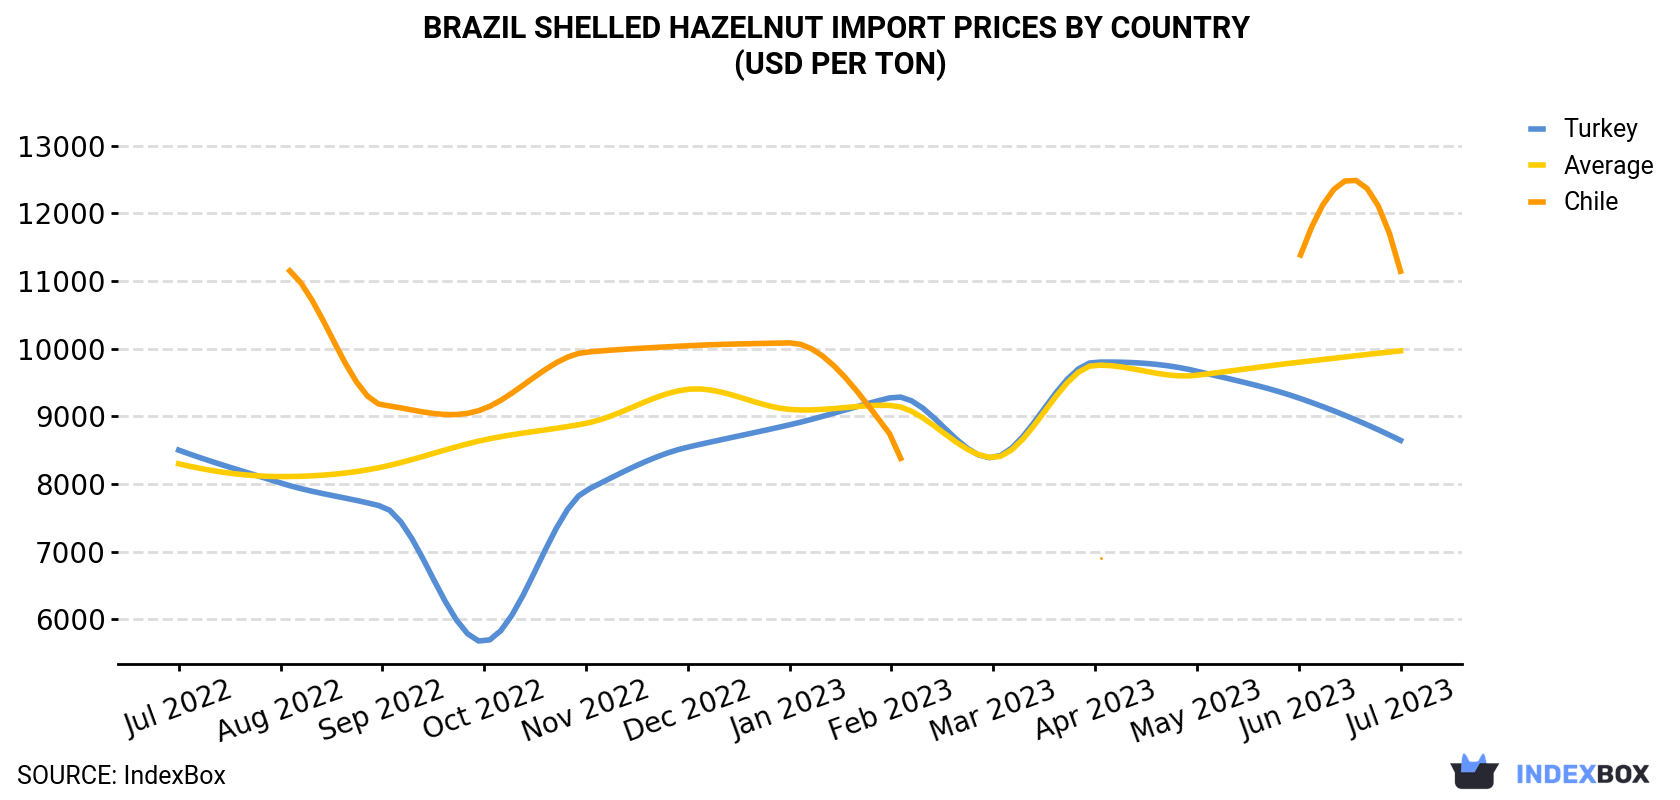 Brazil Shelled Hazelnut Import Prices By Country (USD Per Ton)